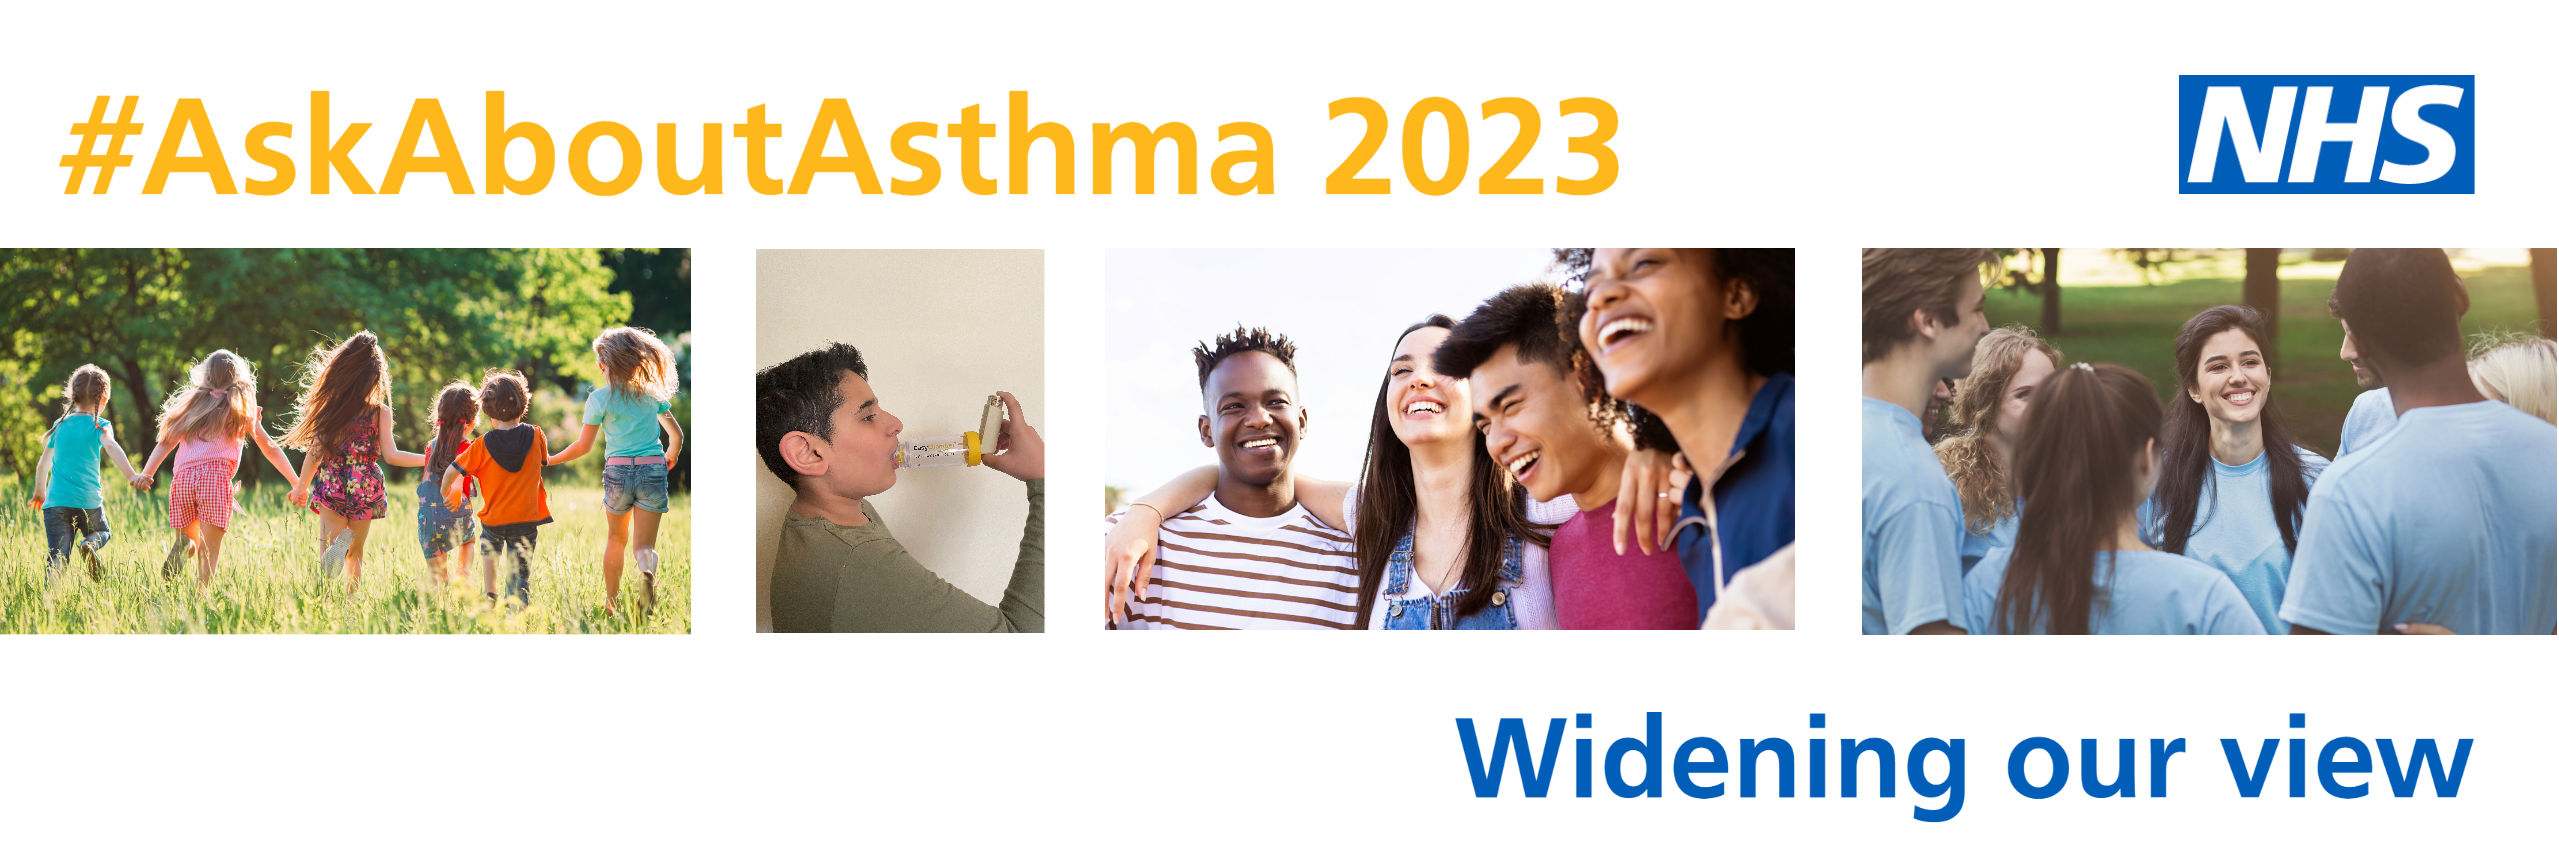 Ask About Asthma banner - click to open link